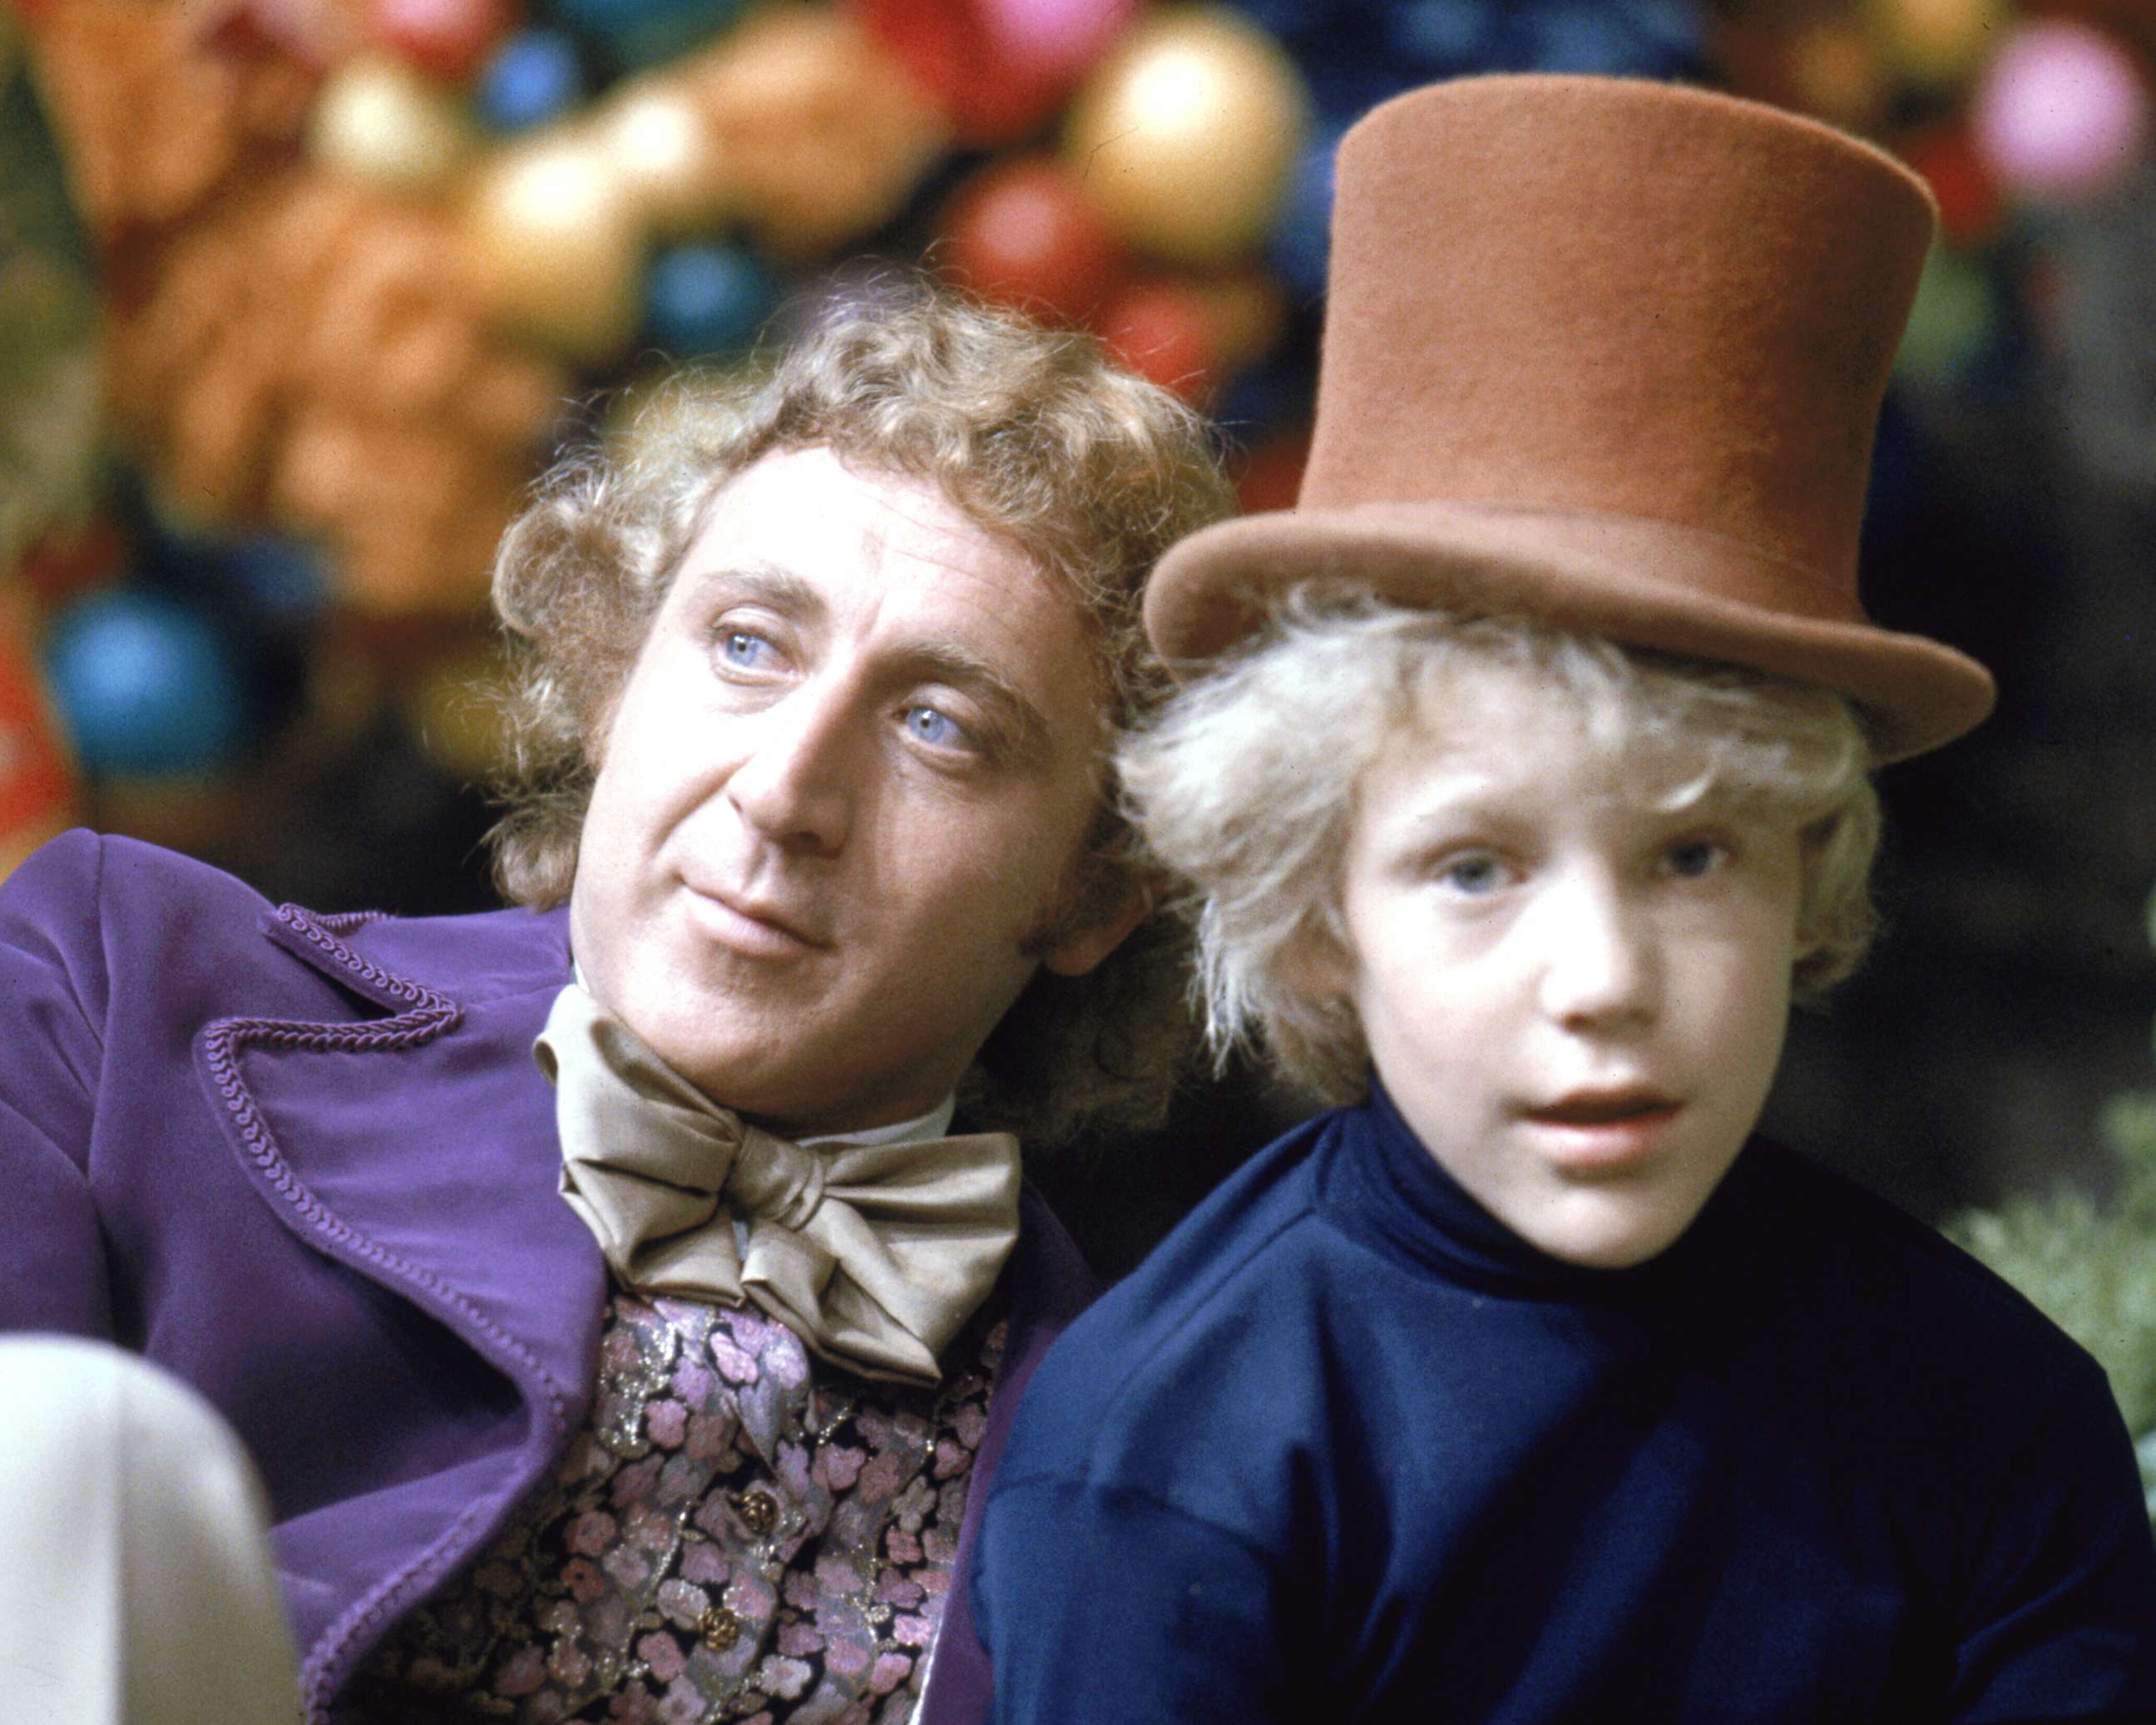 PHOTO: Gene Wilder as Willy Wonka and Peter Ostrum as Charlie Bucket on the set of the 1971 film "Willy Wonka and the Chocolate Factory."